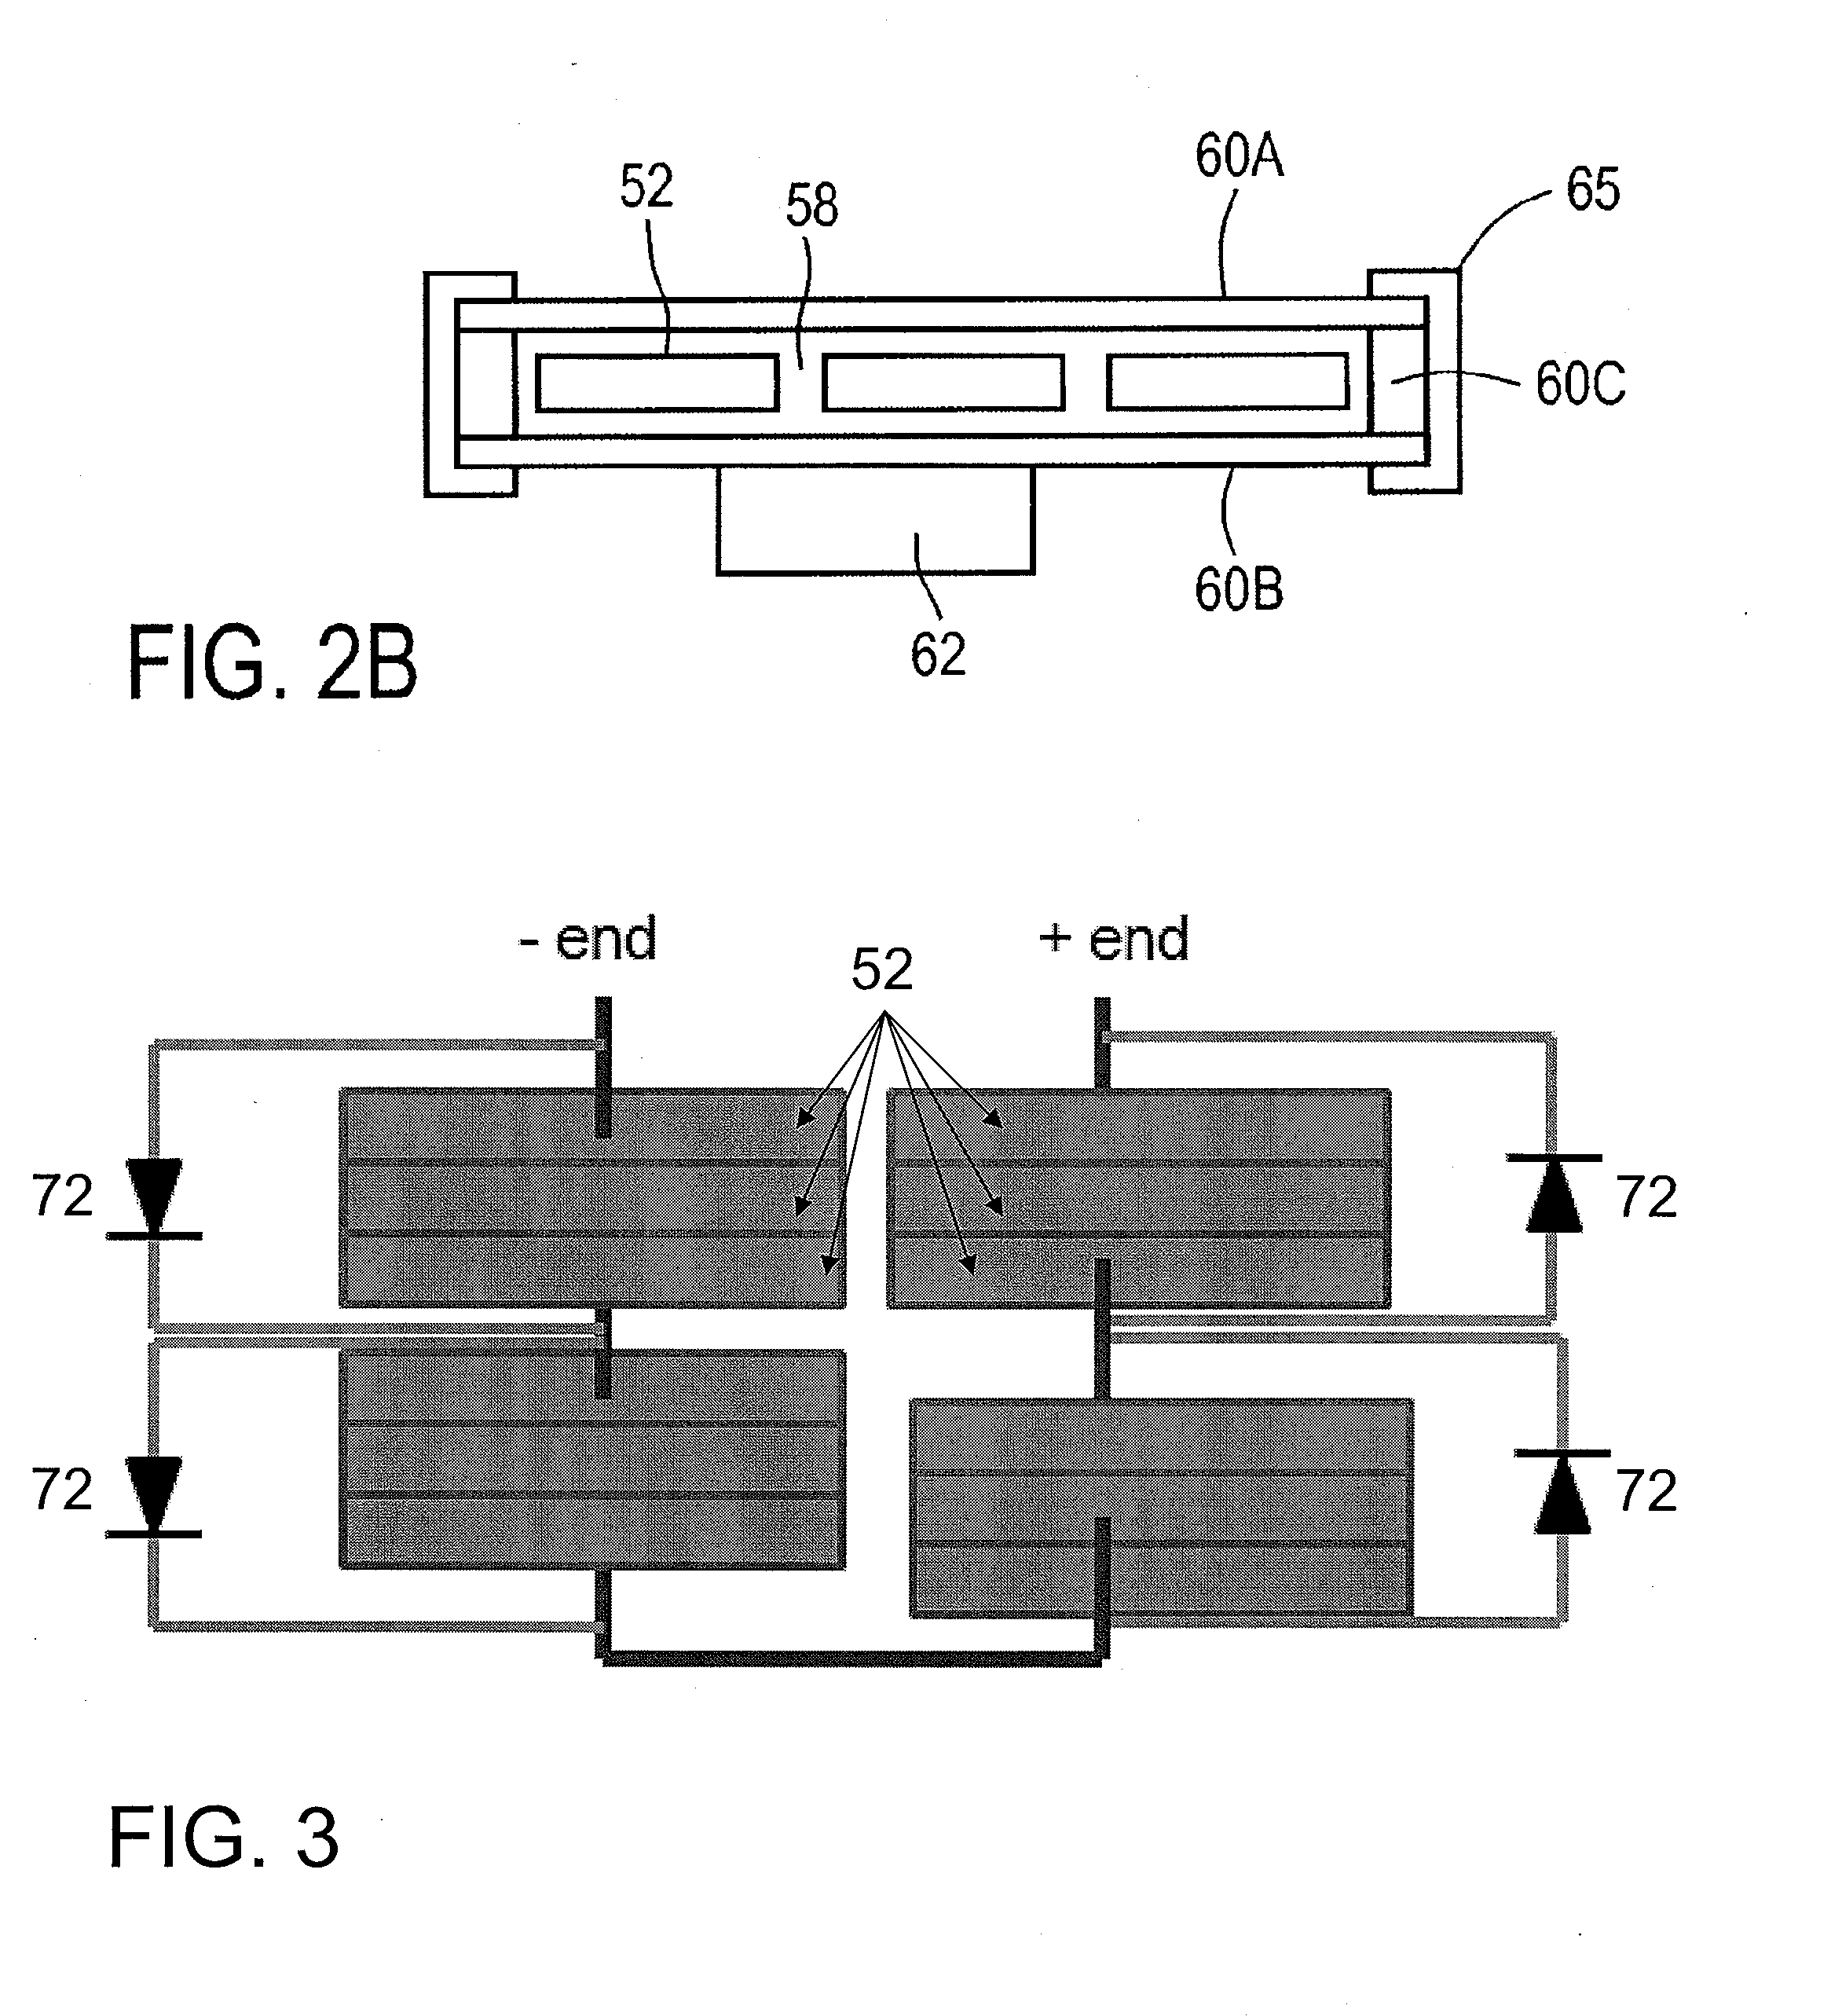 Cigs based thin film solar cells having shared bypass diodes